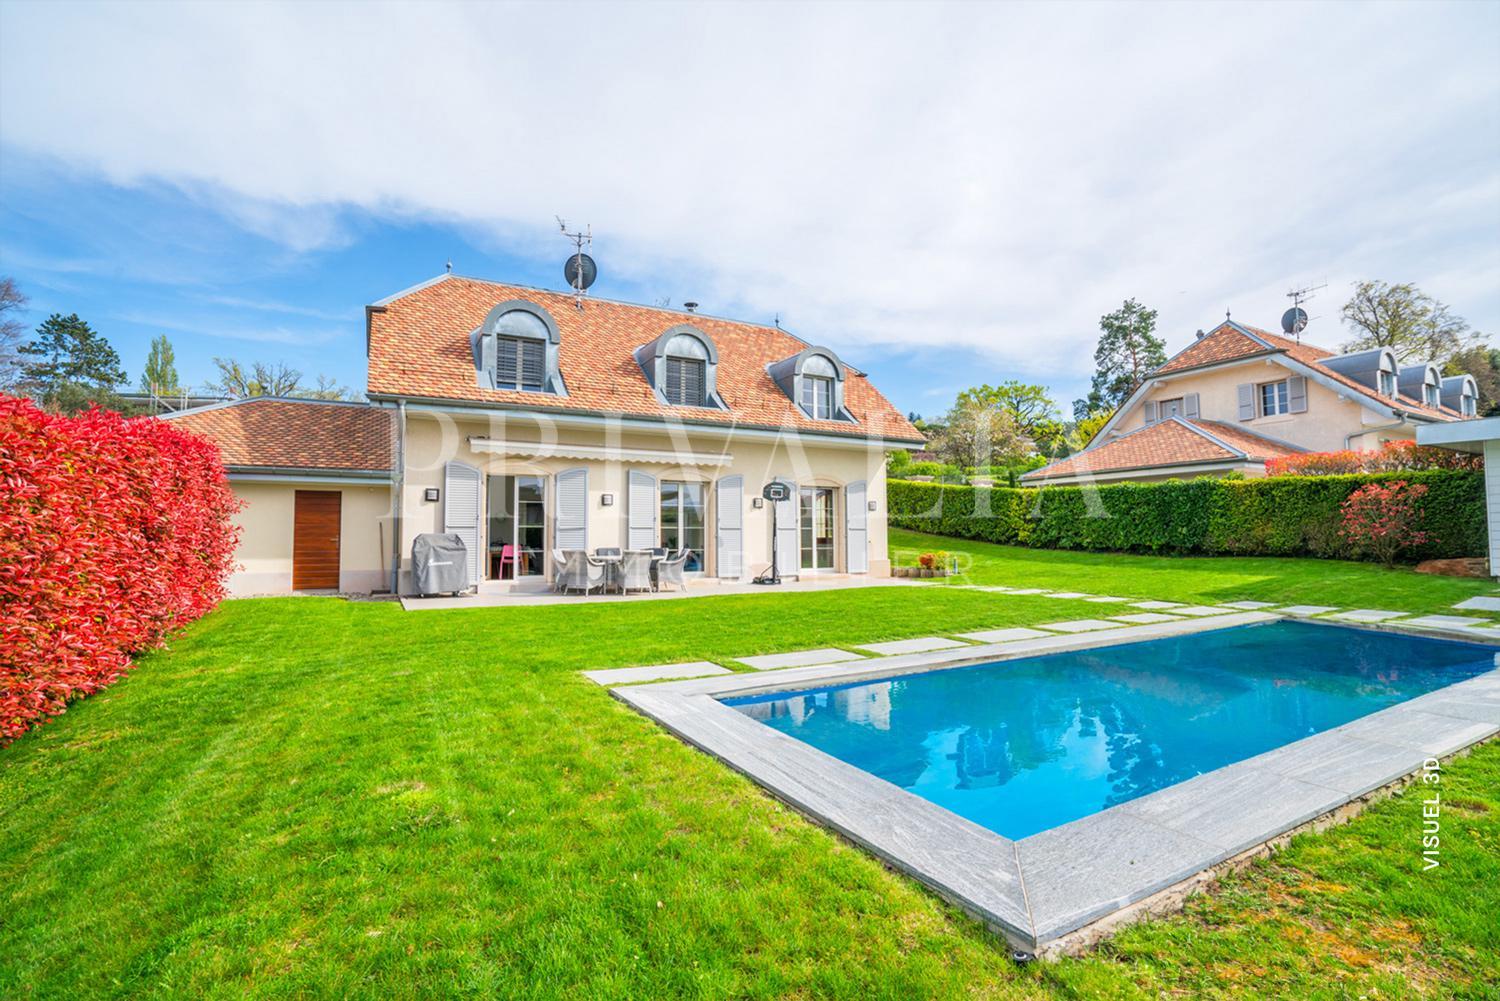 PrivaliaUnique: Magnificent villa with swimming pool on the heights of Cologny